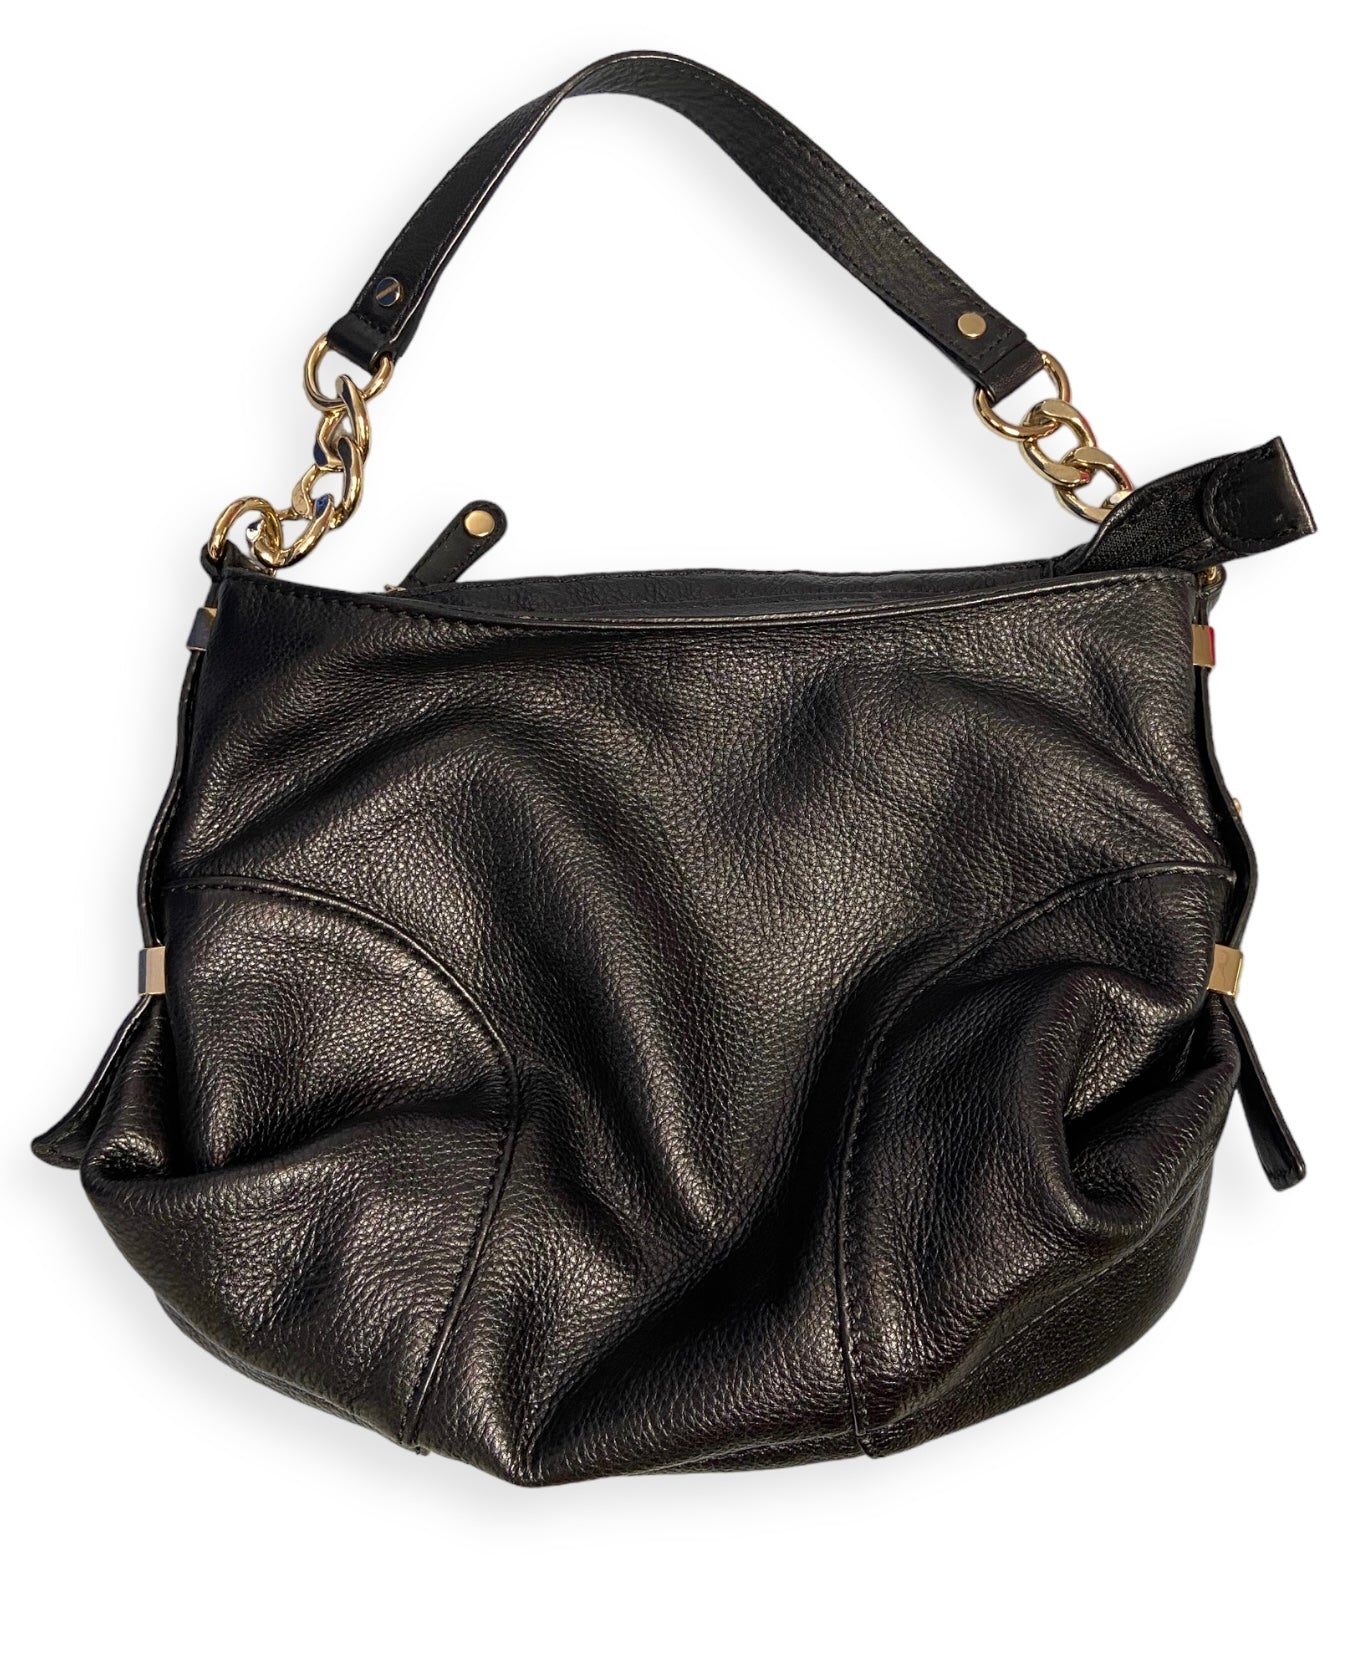 Yvonne Recycled Vegan Leather Shoulder Bag, Small - Pema New York